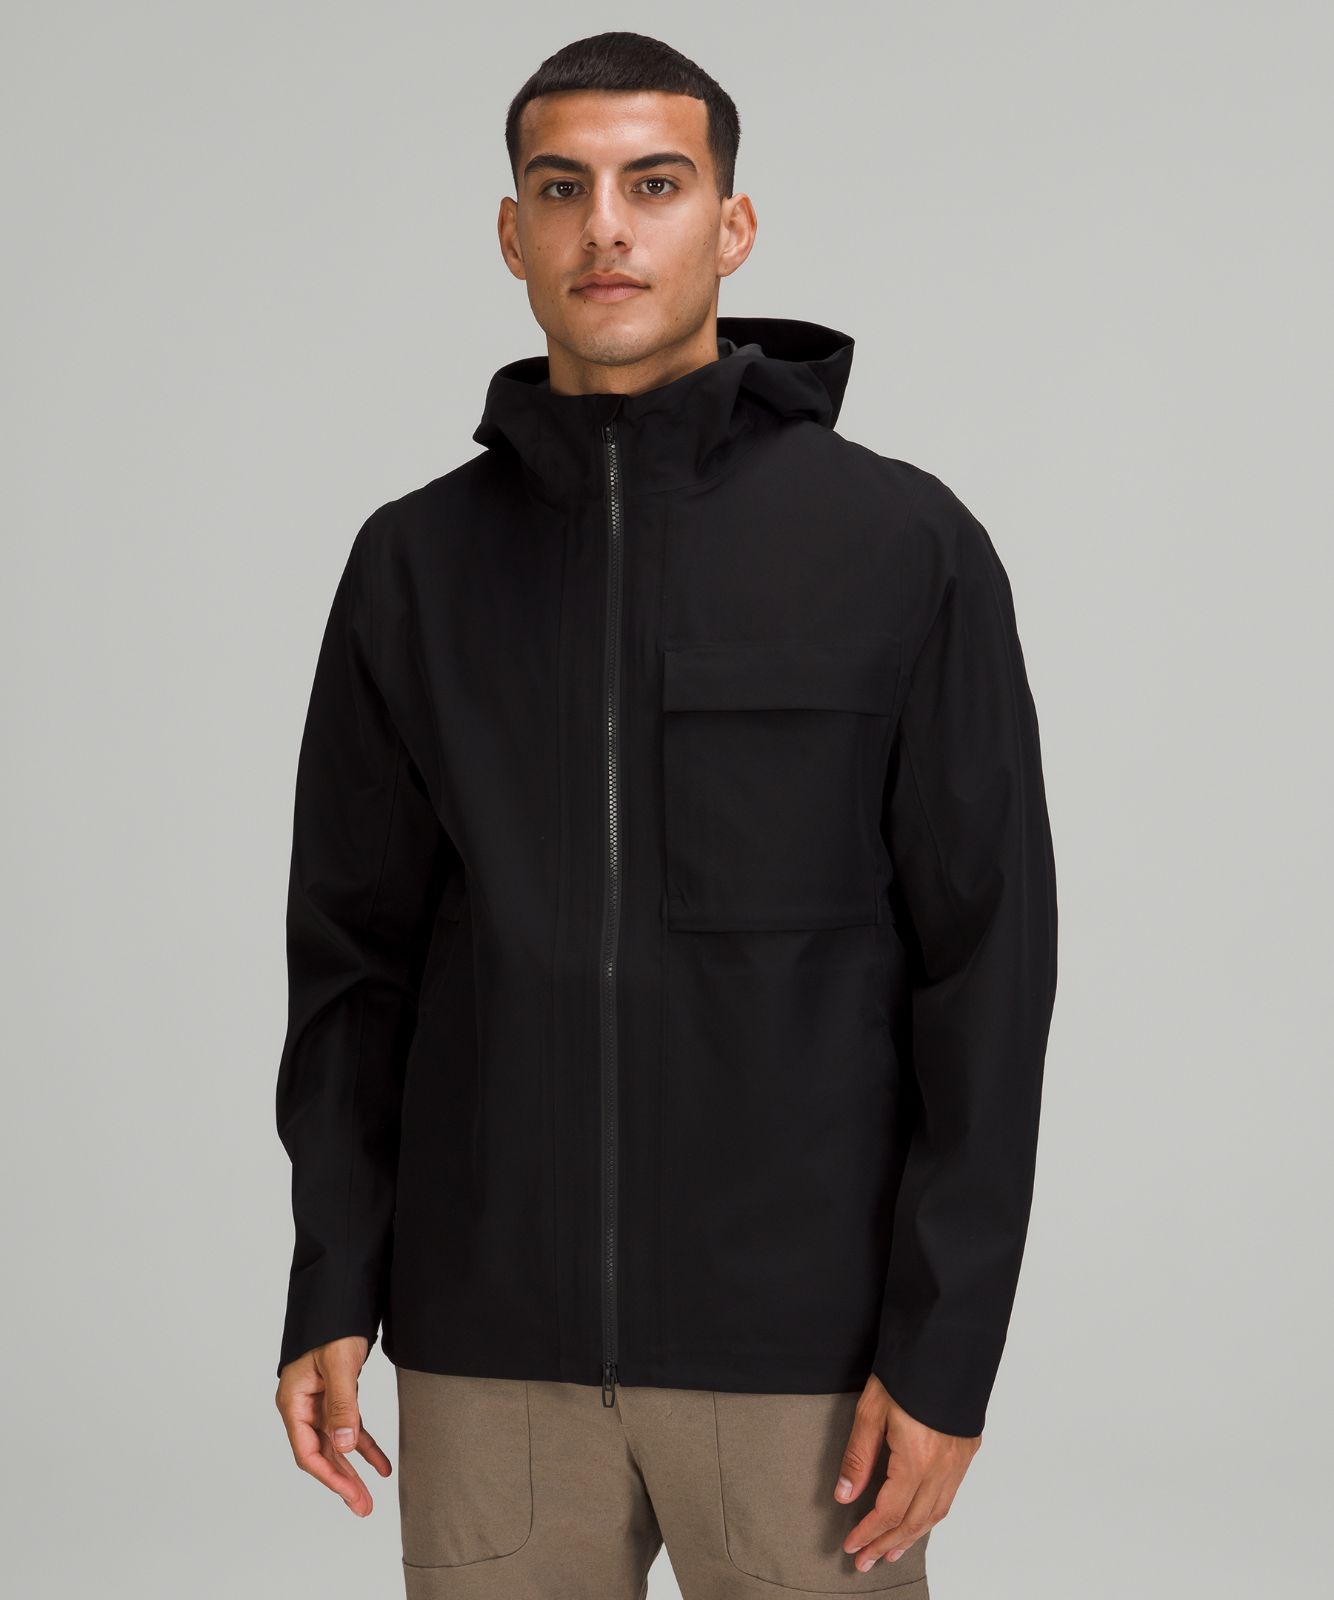 Outpour StretchSeal Jacket | Coats and Jackets | Lululemon HK